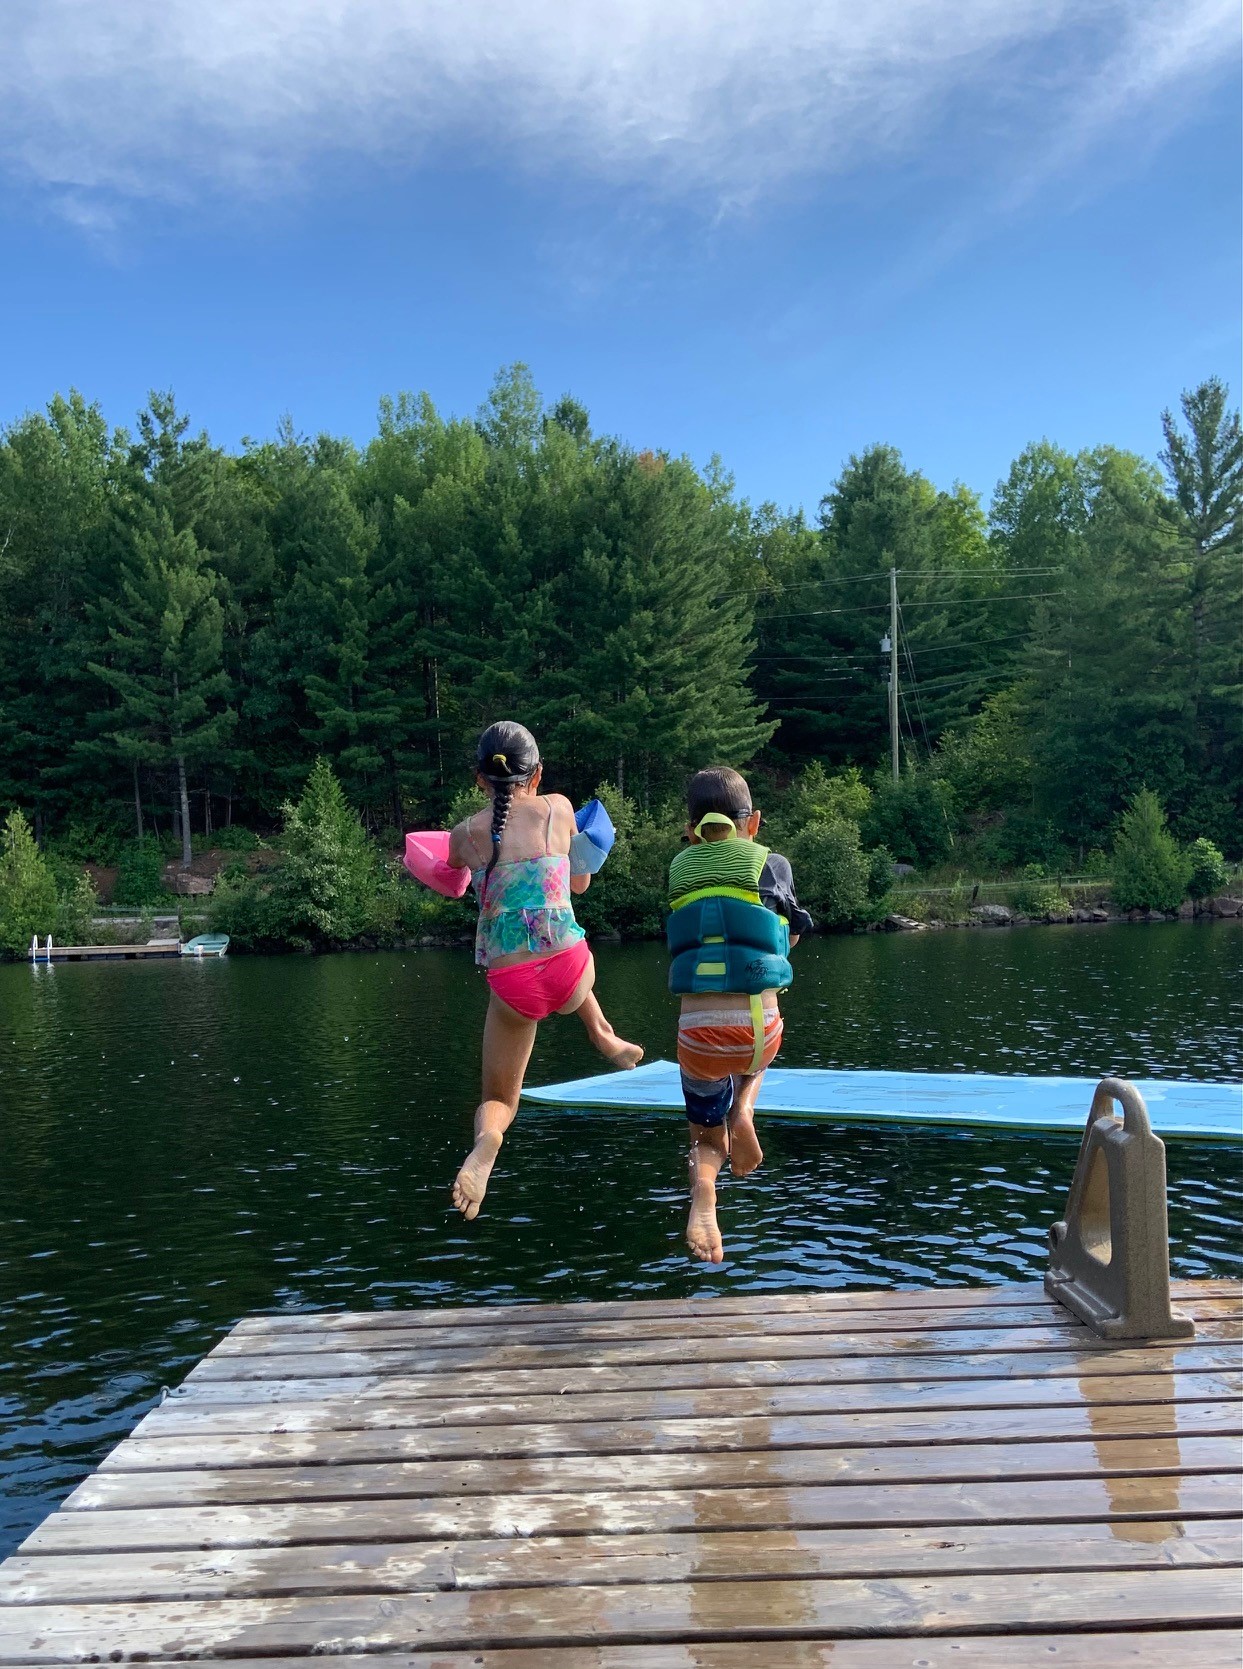 Anita Krupa's kids, jumping off the dock and into the lake